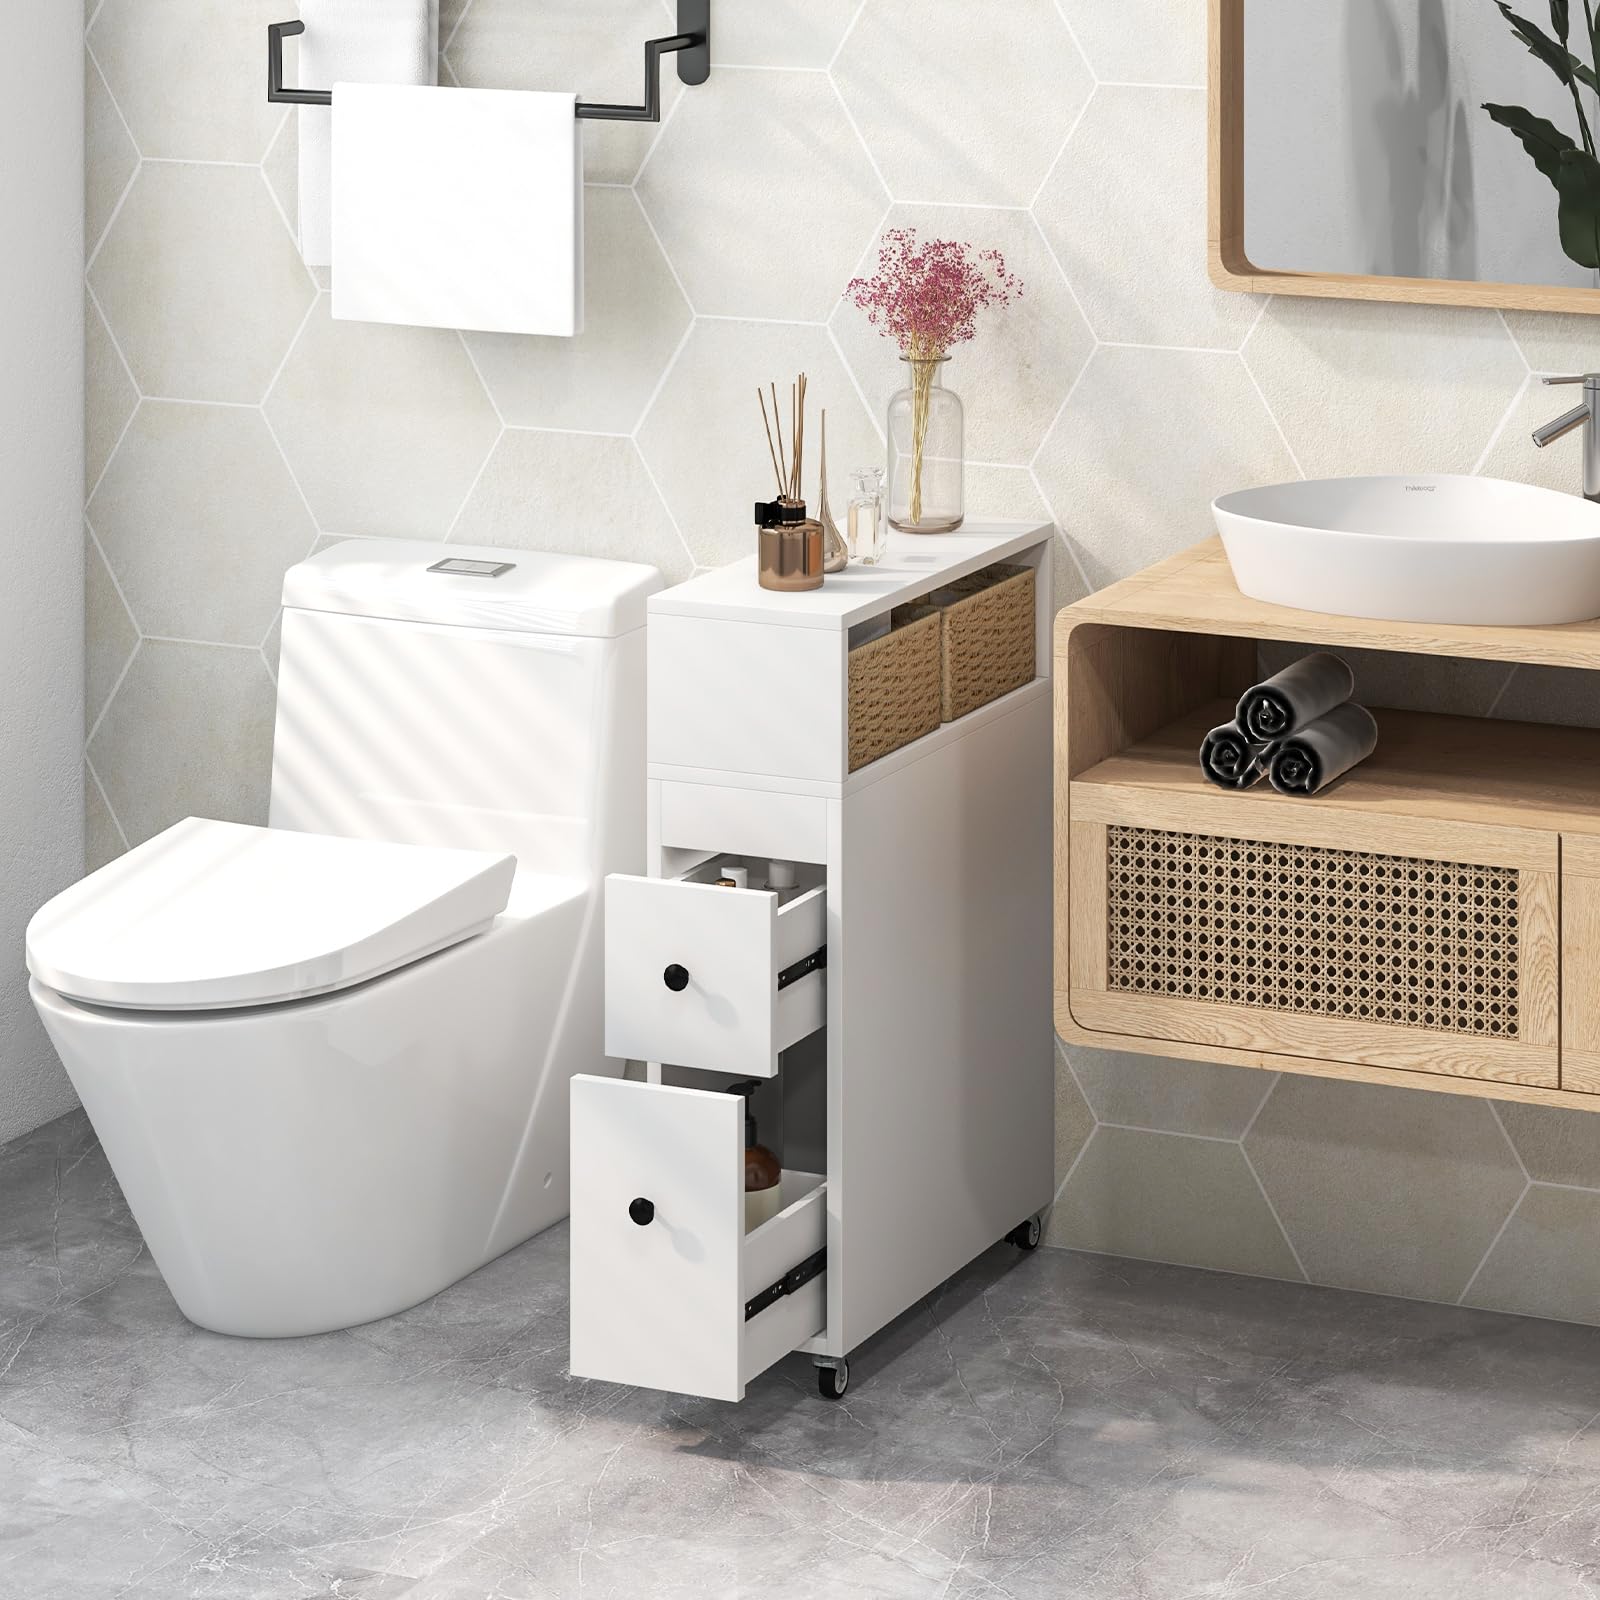  Giantex Over The Toilet Storage Cabinet with 2 Doors and  Adjustable Shelves, Space-Saving Rack Bathroom Shelf with Paper Holder,  Freestanding Bathroom Storage Over The Toilet for Small Space, White : Home